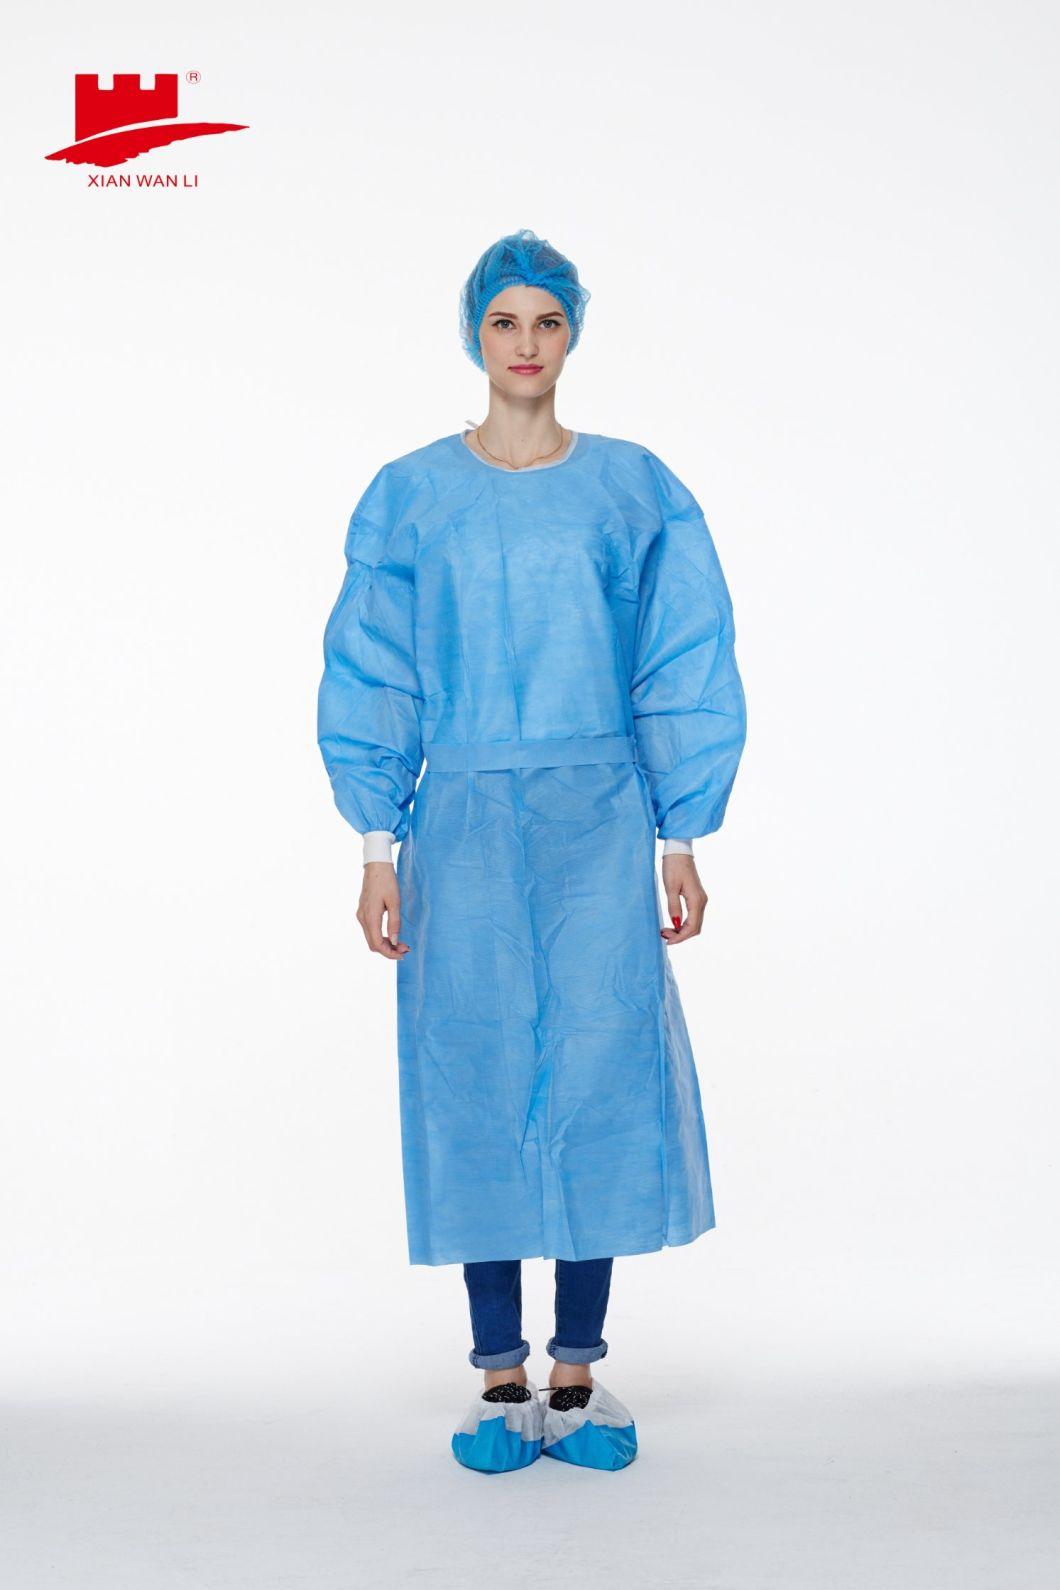 Level 3 Surgical Disposable Waterproof Isolation Gowns of SMS/SMMS